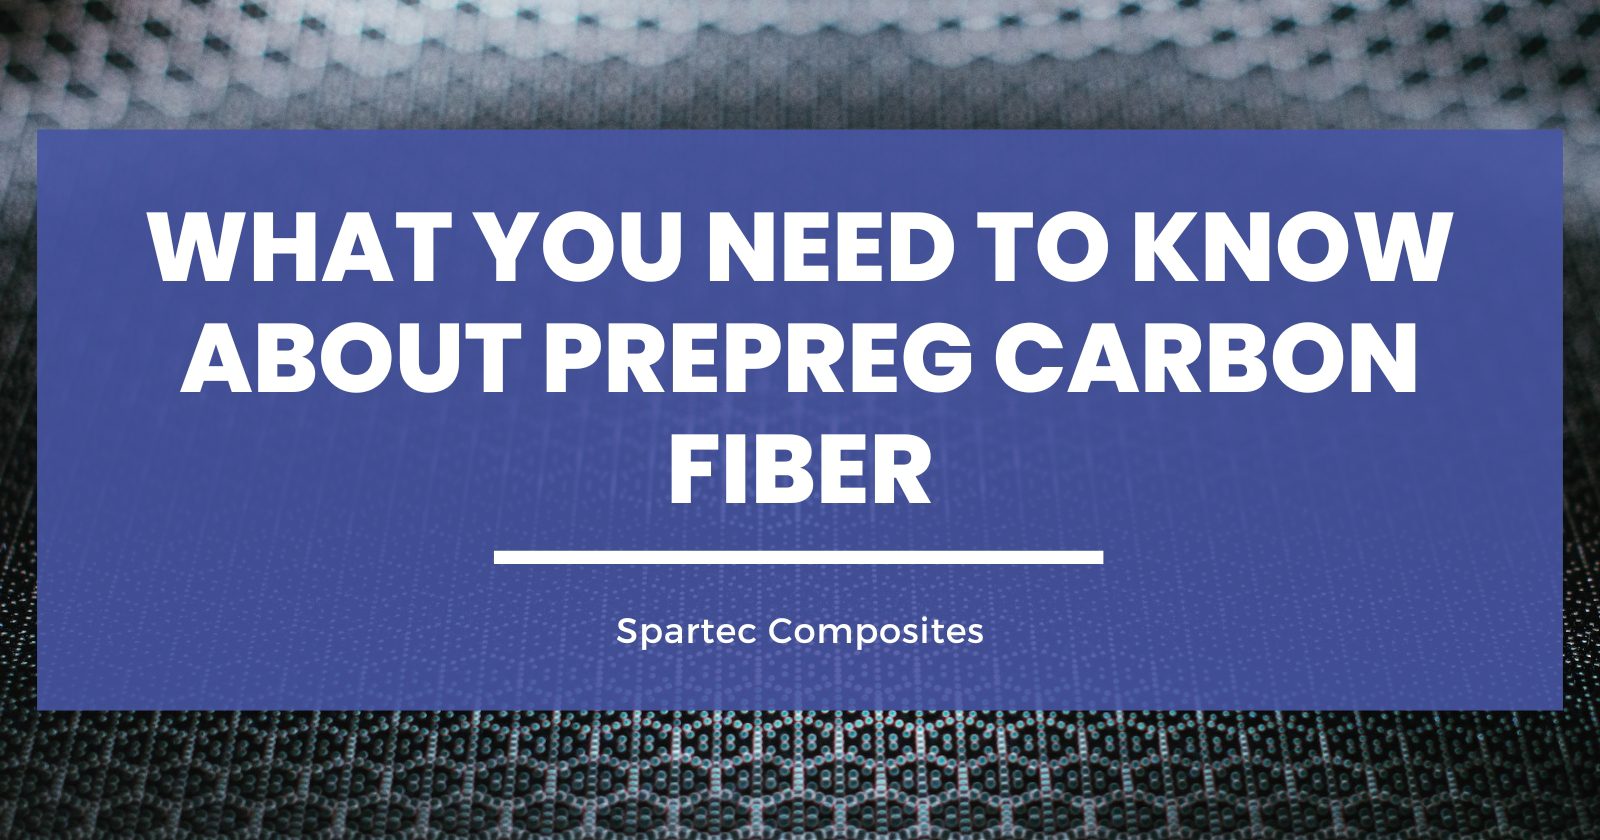 What You Need to Know about Prepreg Carbon Fiber